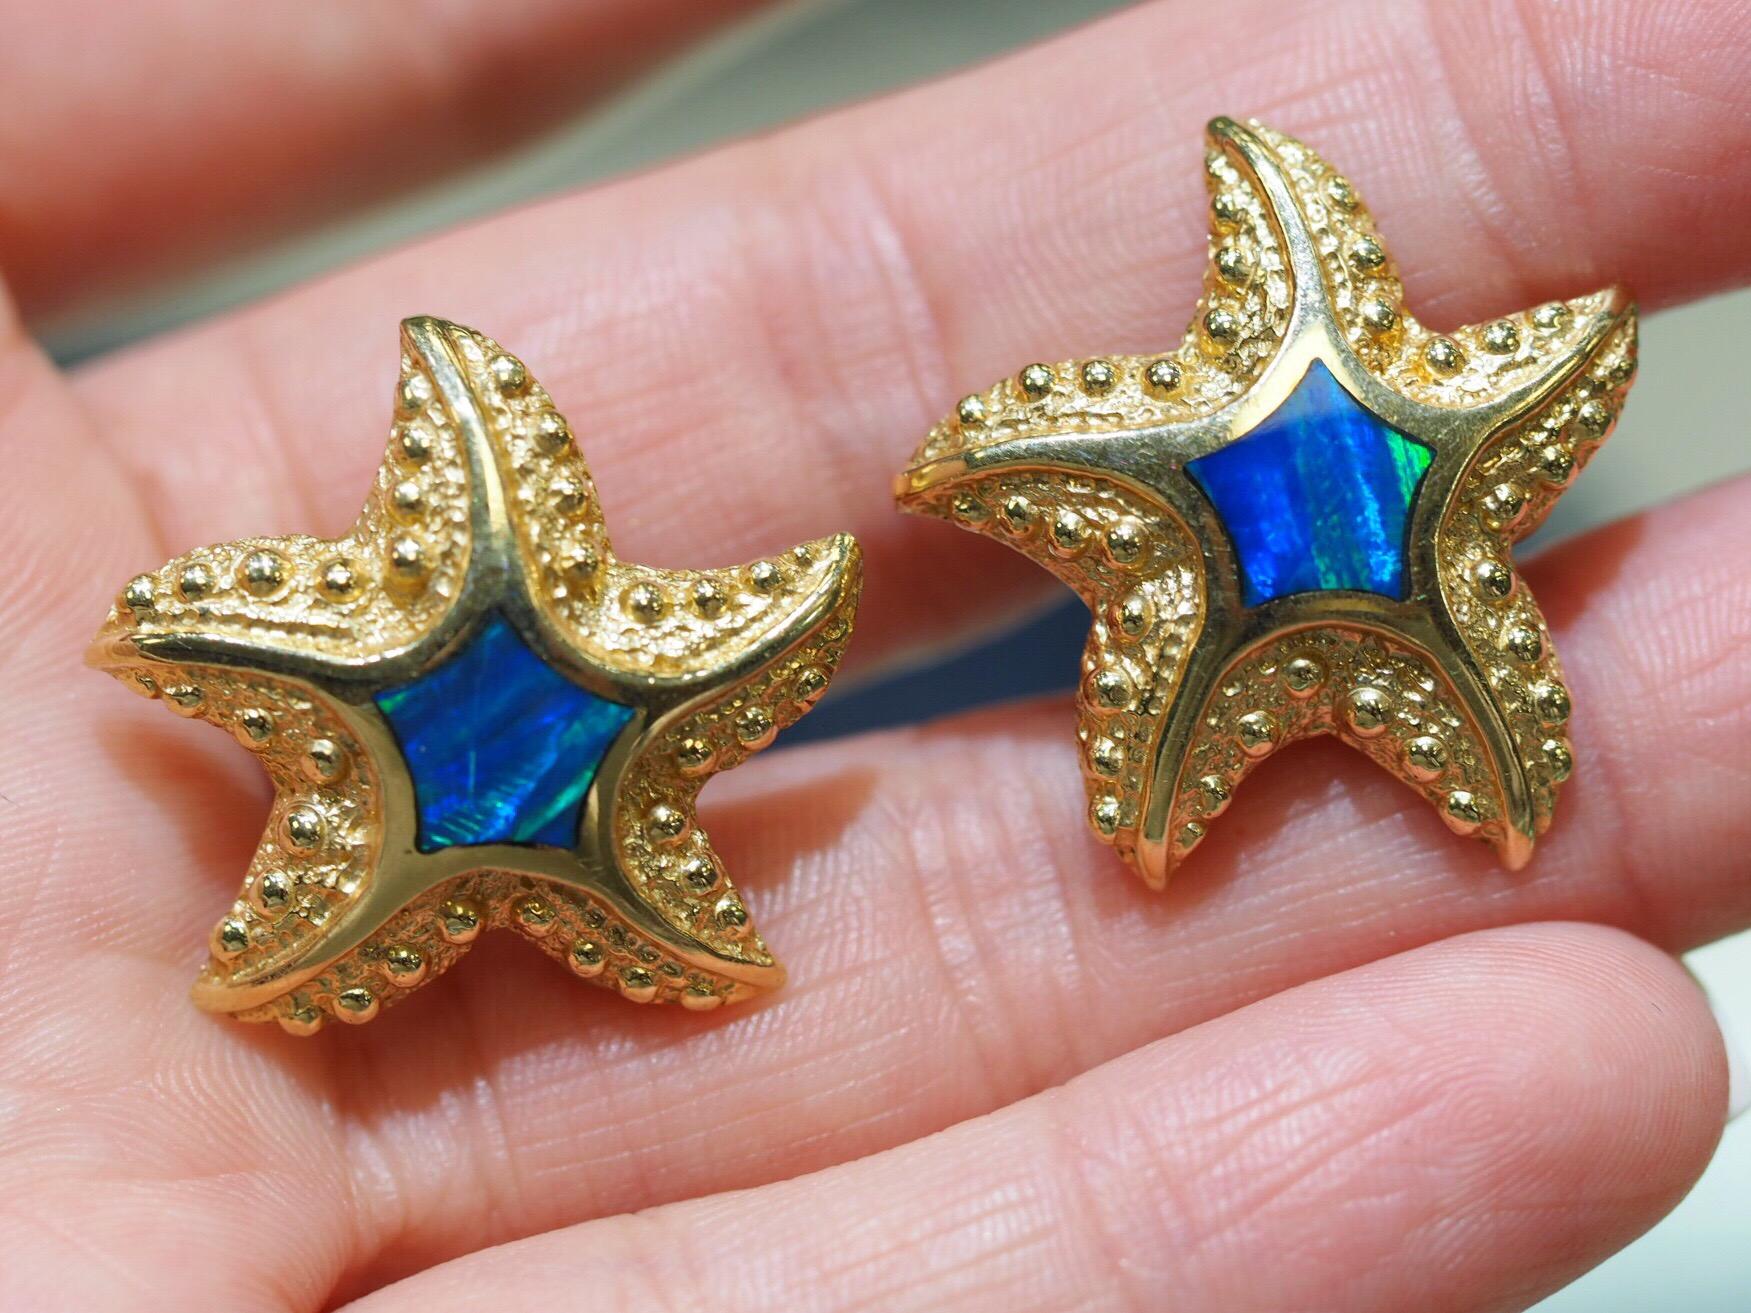 Beautiful 14k Yellow Gold Starfish earrings with blue-green Opal in the center. The earring backs have a post with clip. weighing 9.1 grams.